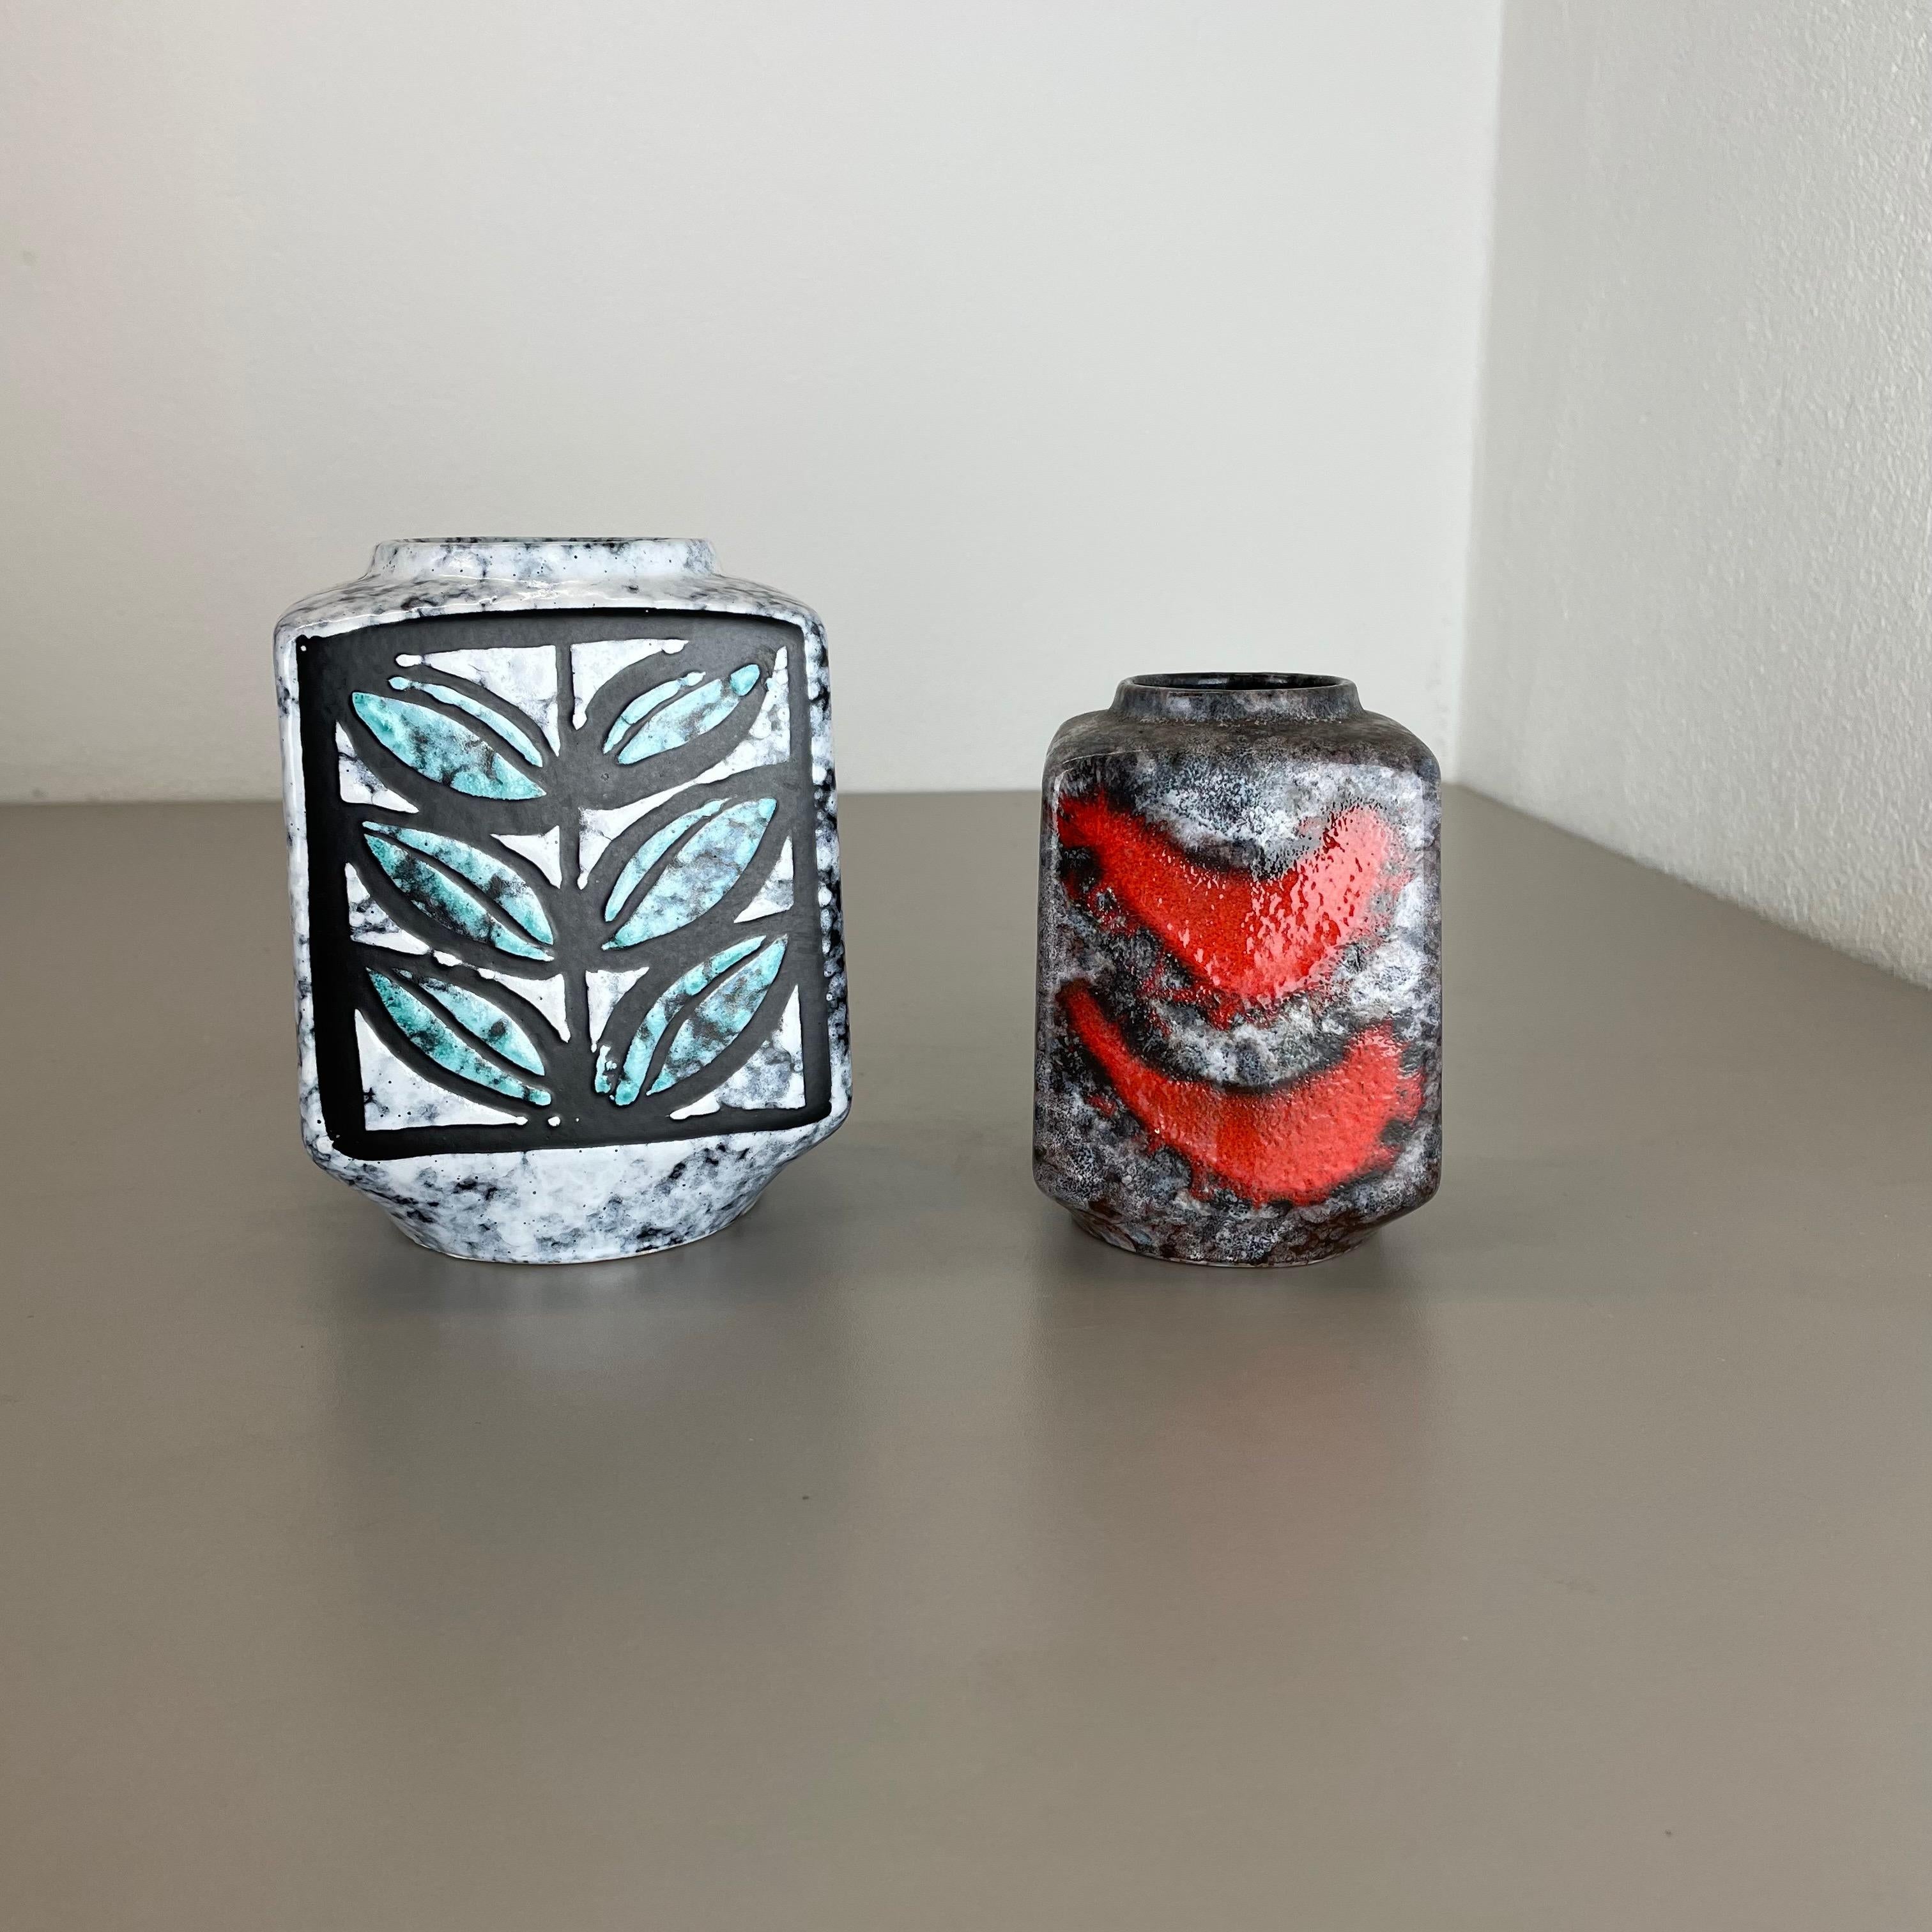 Article:

Ceramic pottery vase set of 2


Origin:

Germany, GDR


Producer:

Strehla, Germany GDR


Decade:

1970s


This original vintage pottery objects was designed and produced by Strehla in the 1970s in East Germany, GDR. It